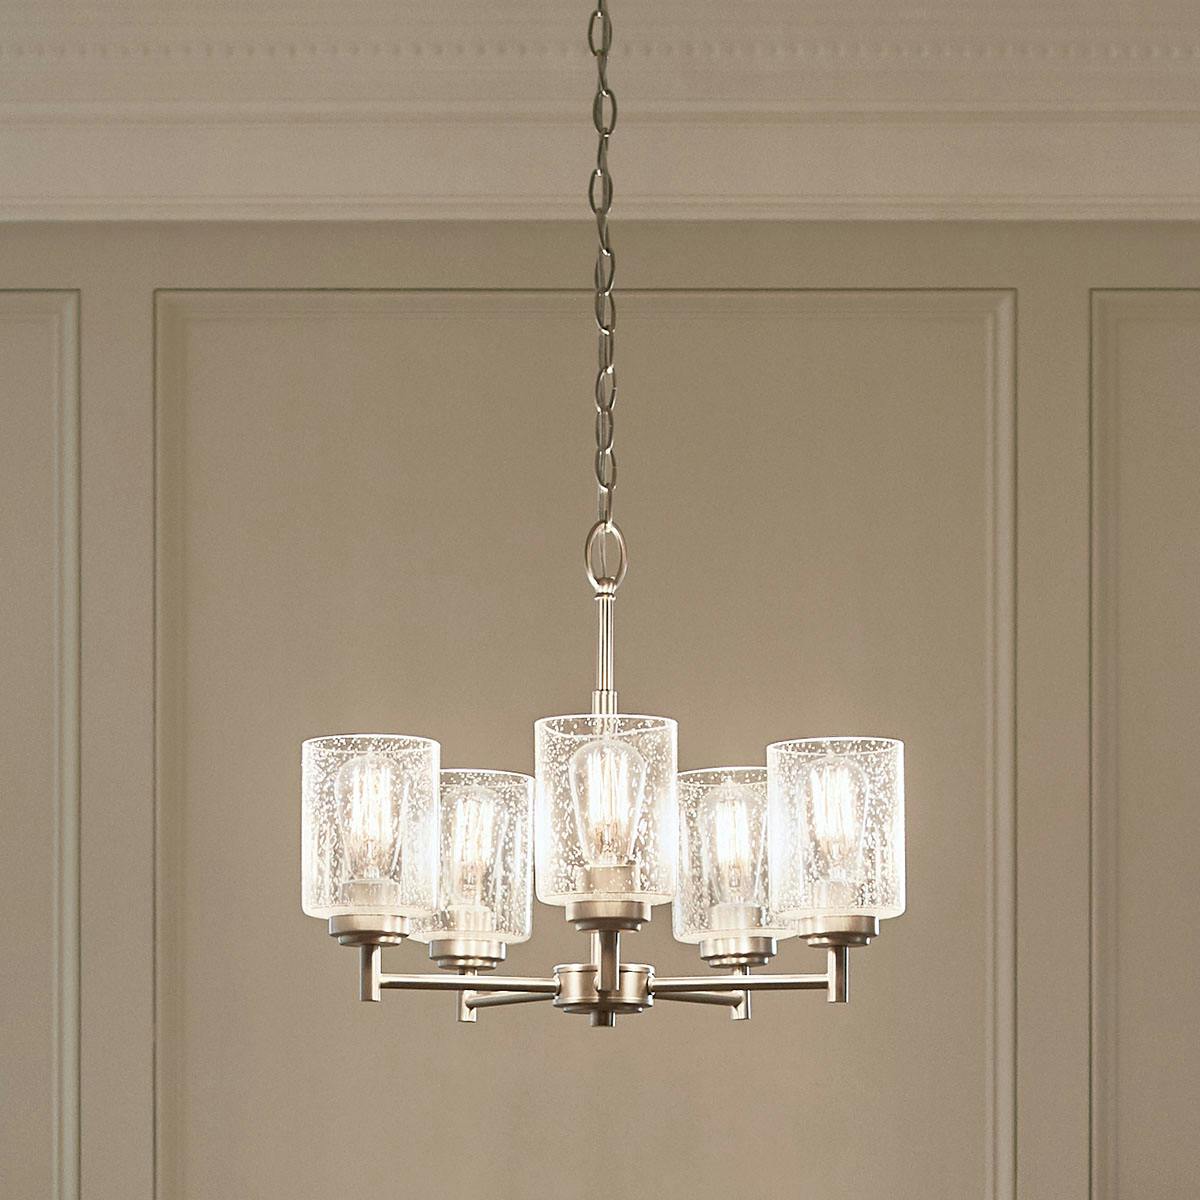 Day time dining room image featuring Winslow chandelier 44030NI